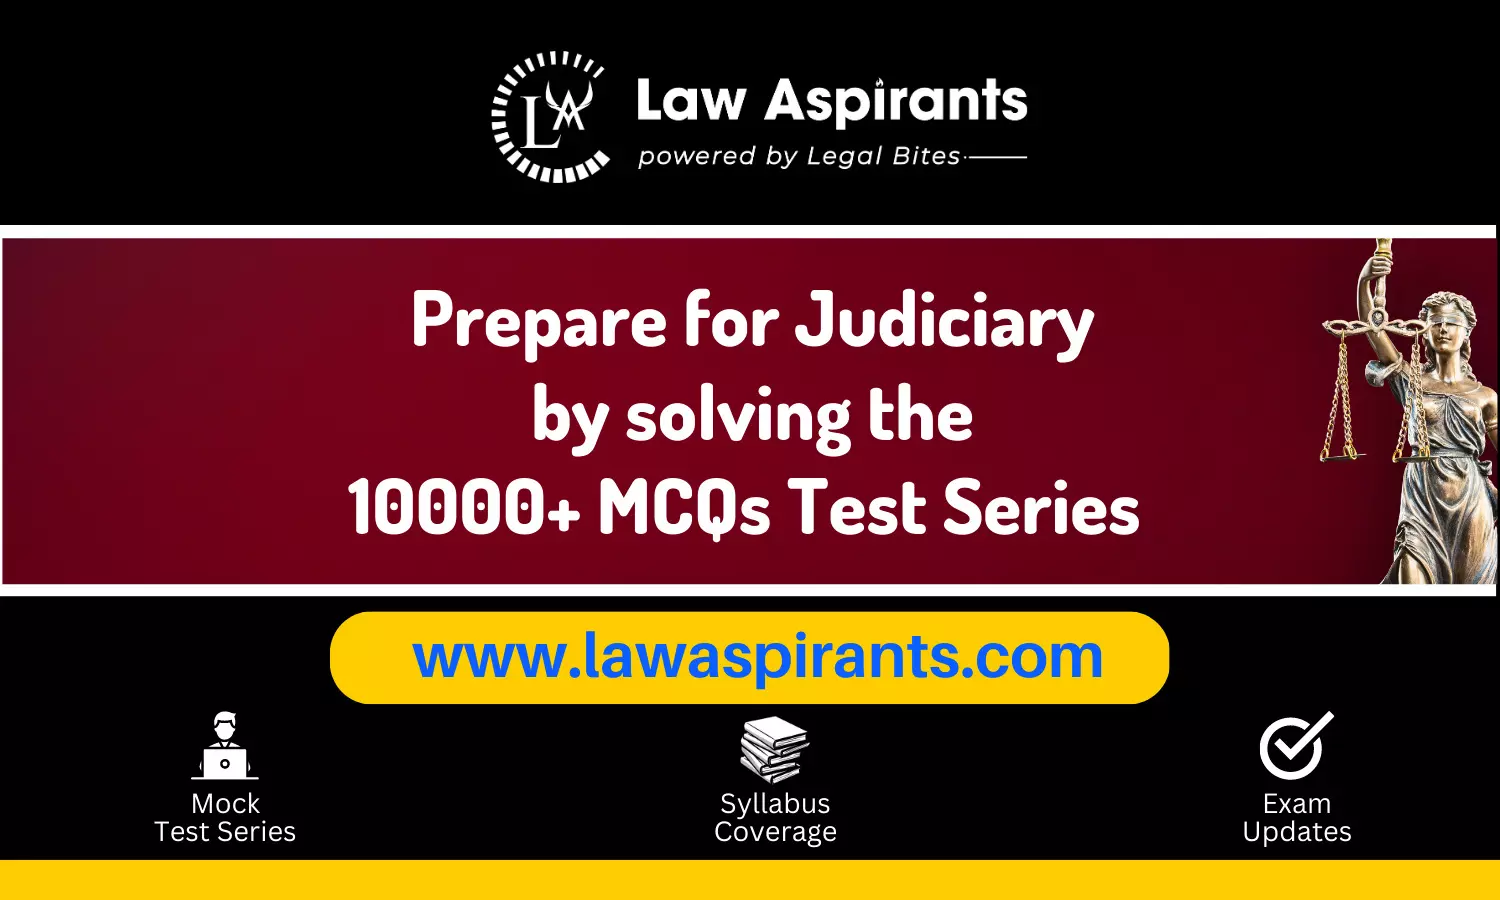 Why should one prepare for Judiciary by solving the MCQs Test Series by Law Aspirants?